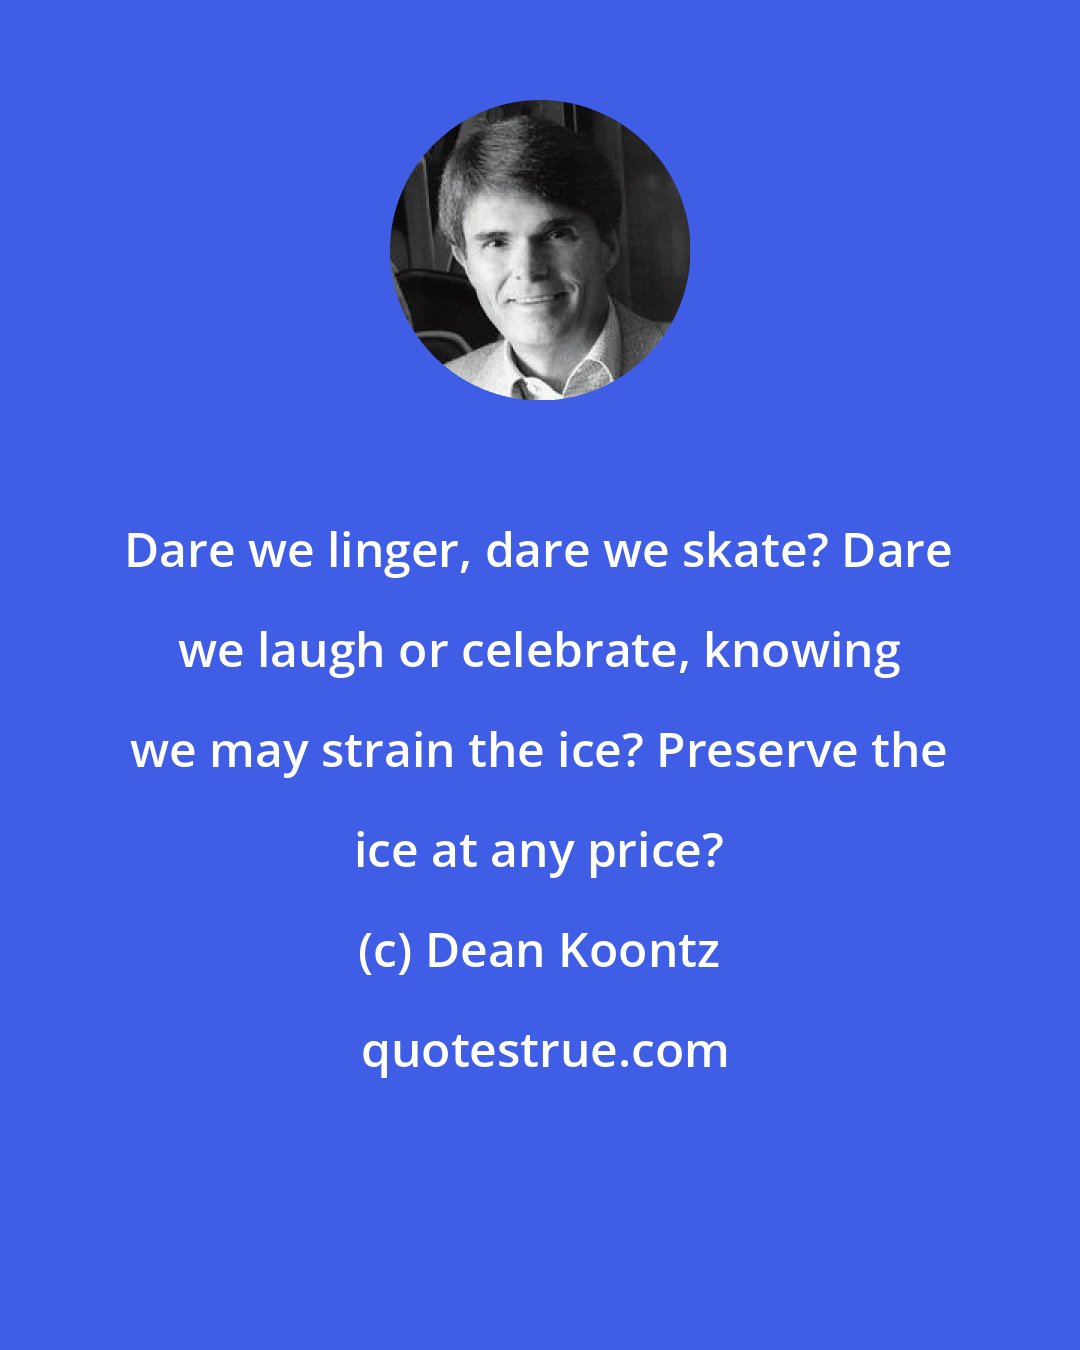 Dean Koontz: Dare we linger, dare we skate? Dare we laugh or celebrate, knowing we may strain the ice? Preserve the ice at any price?